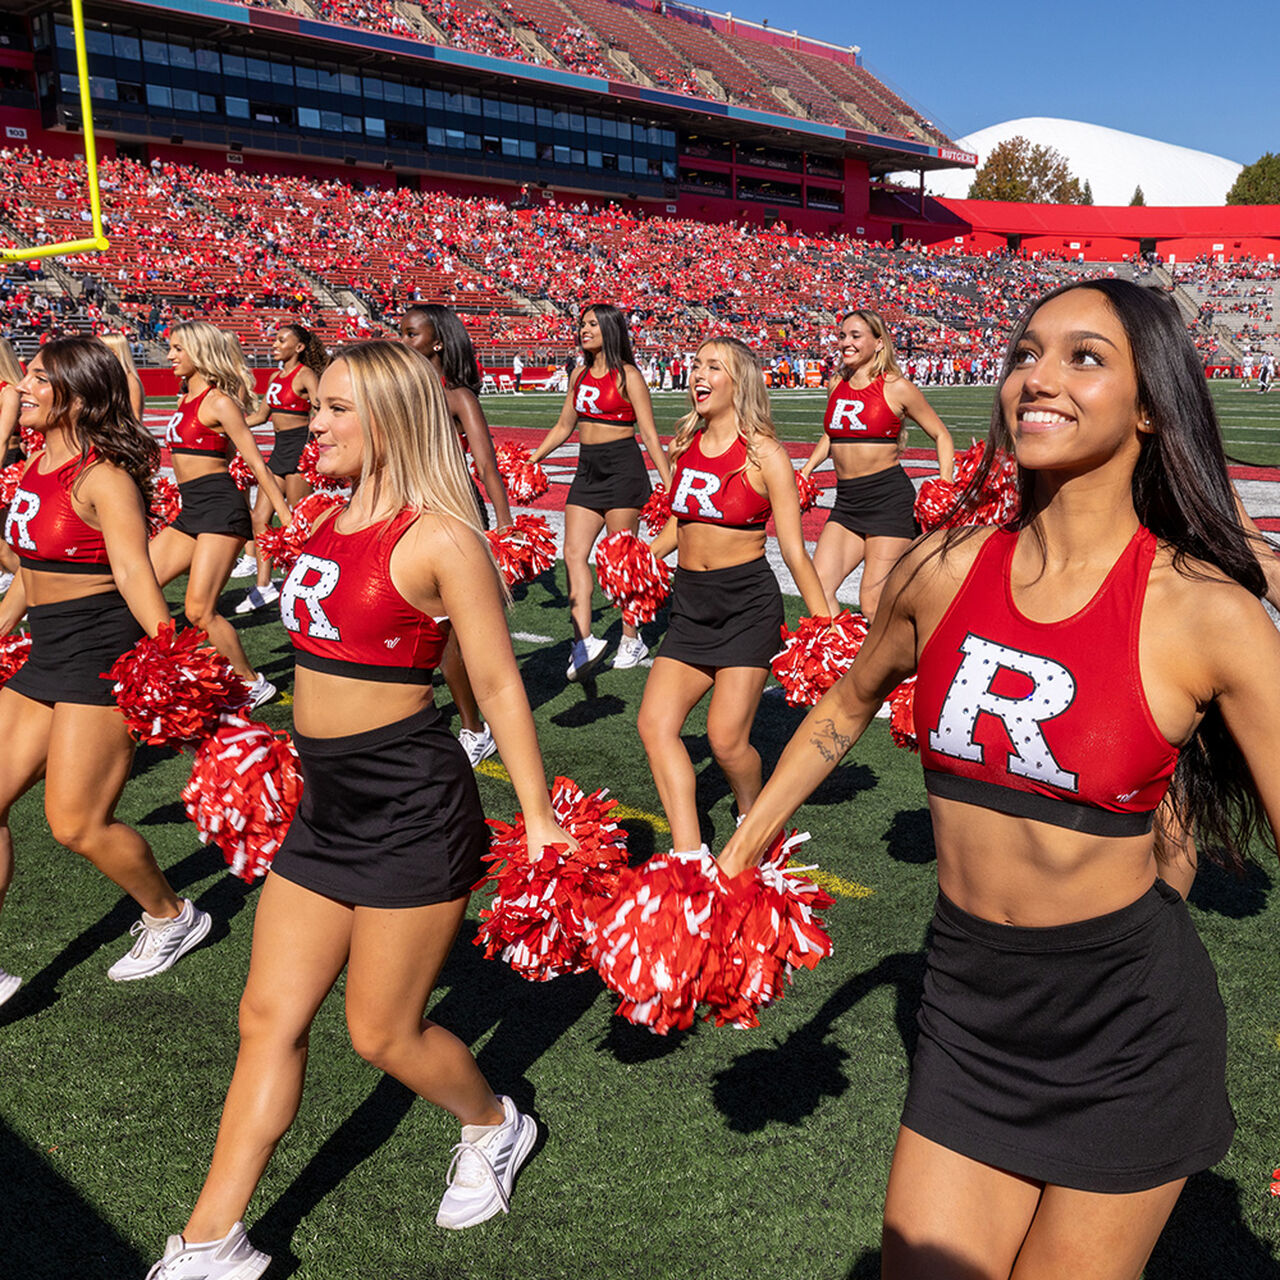 The Rutgers Dance Team doing a routine near the endzone at SHI Stadium during a football game image number 0